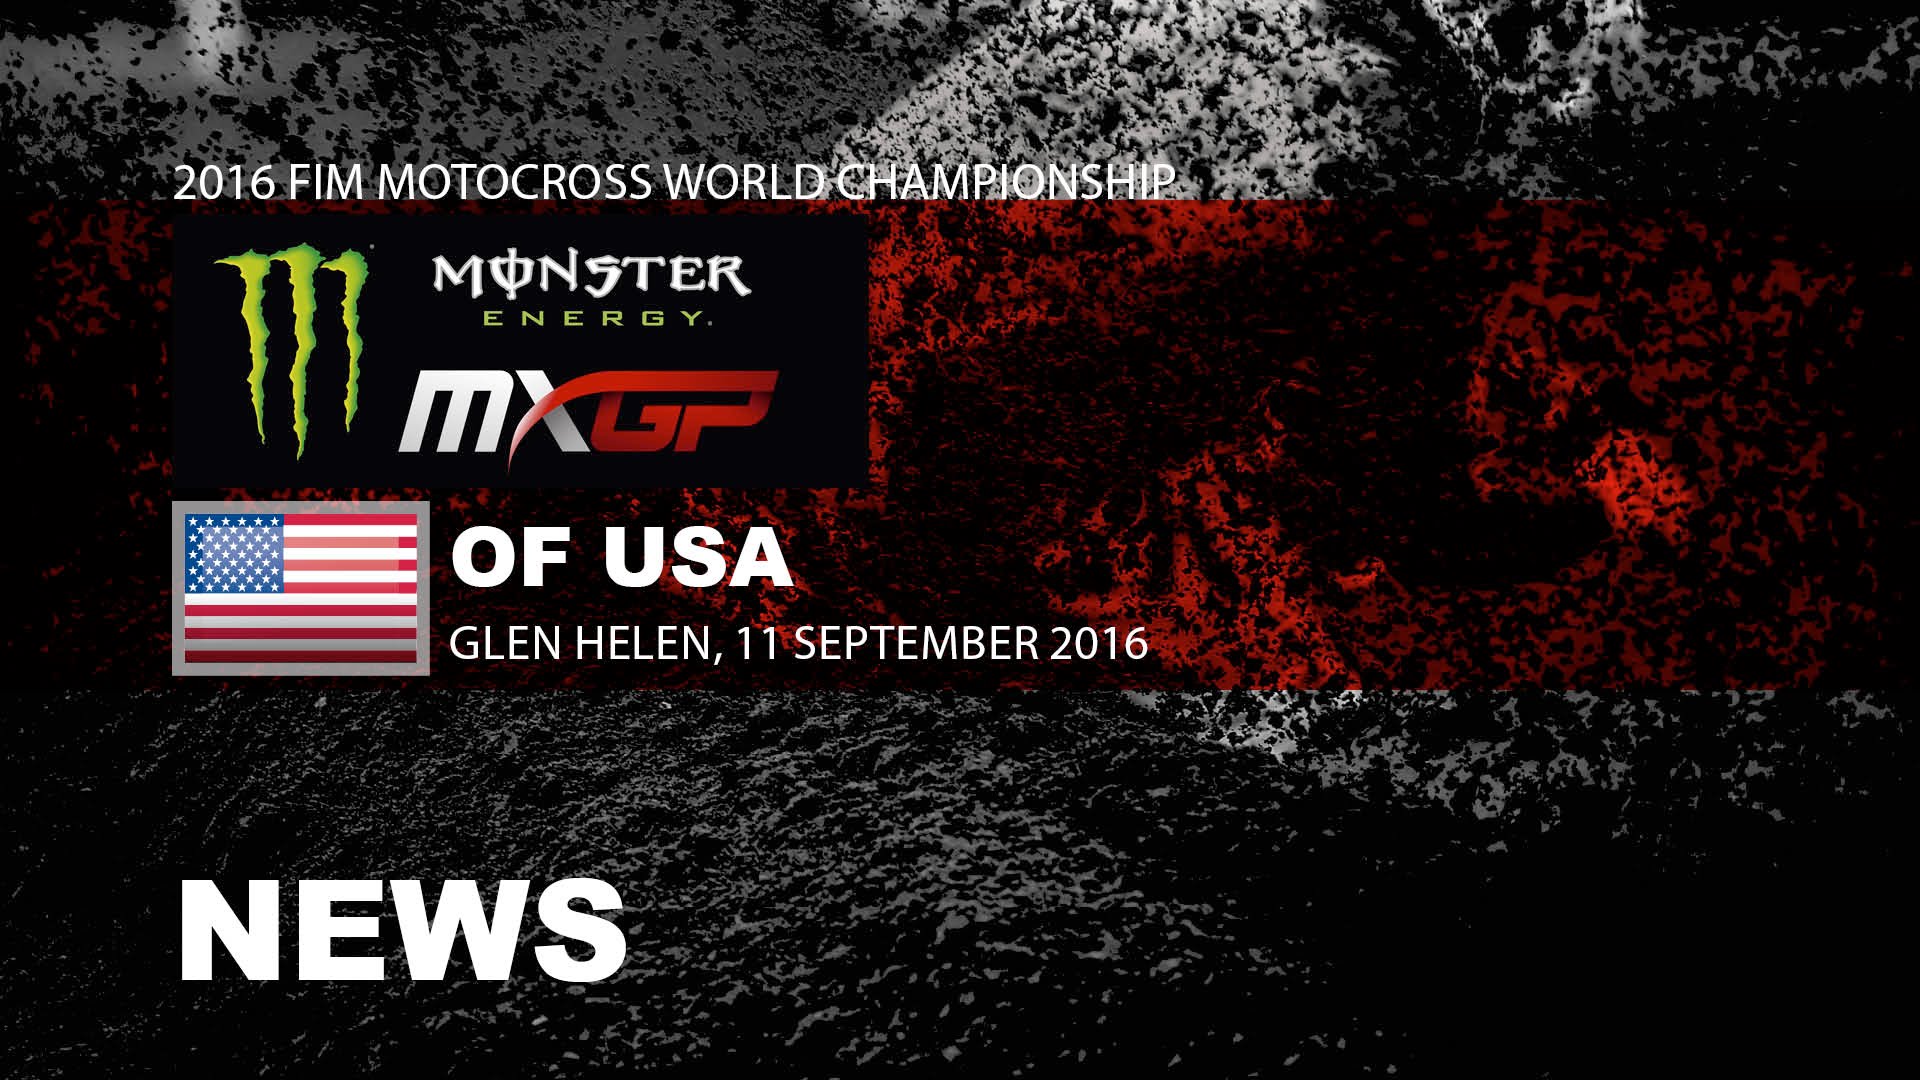 VIDEO: Monster Energy MXGP of The USA Race Highlights 2016